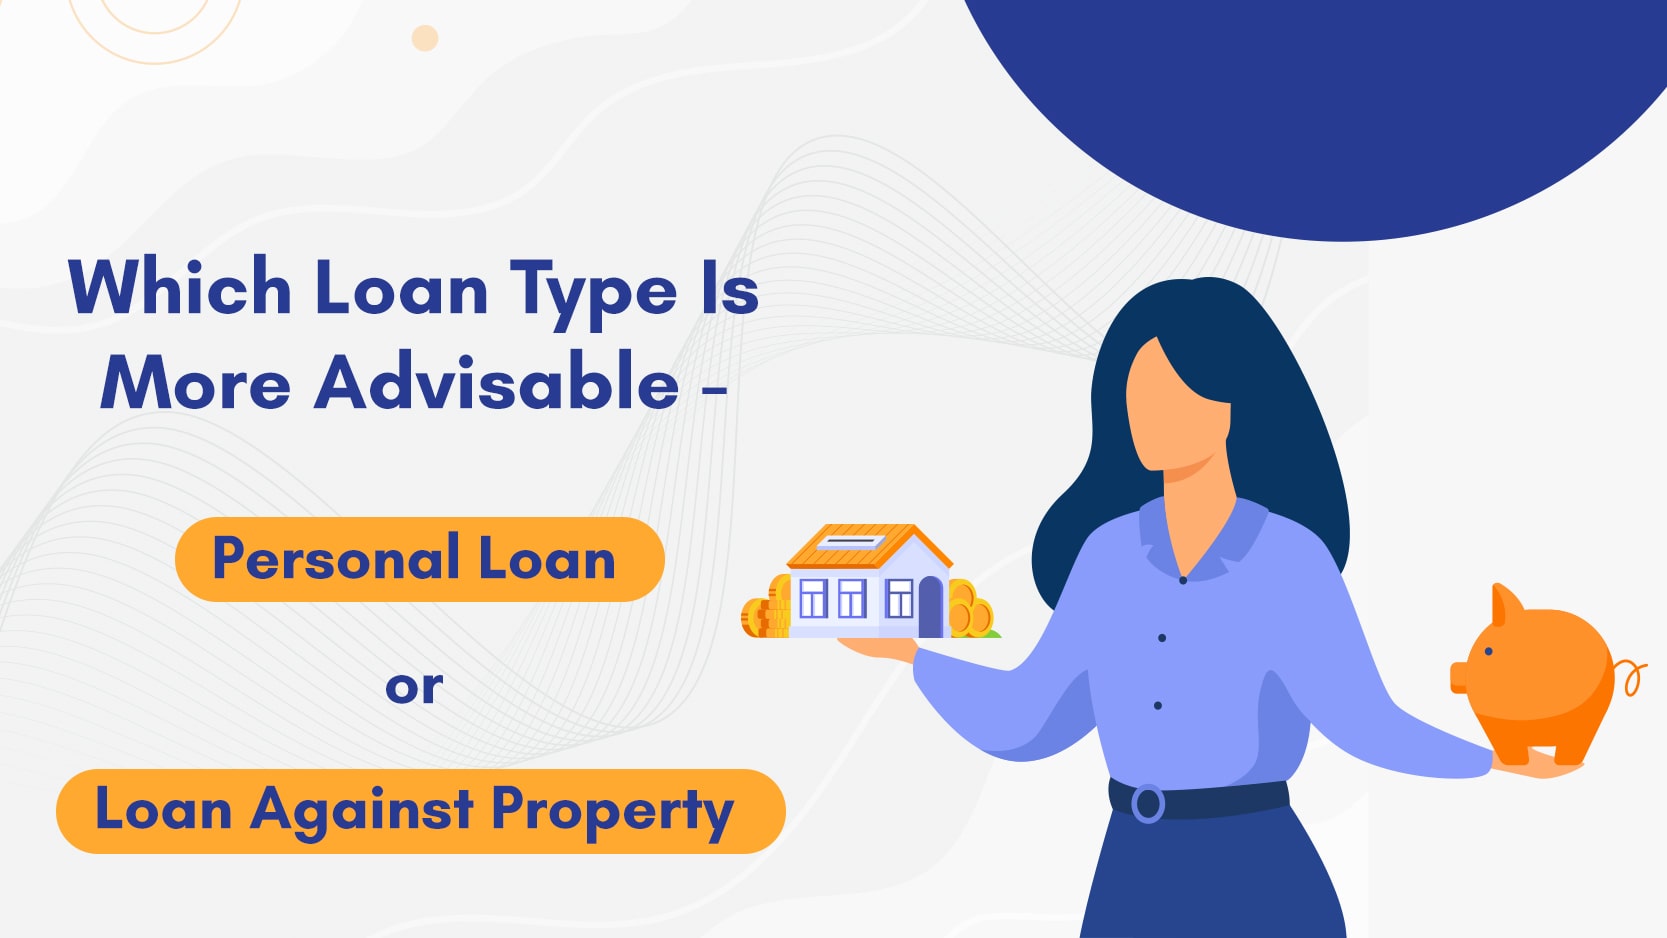 Personal Loan or Loan Against Property : Making the Right Choice
